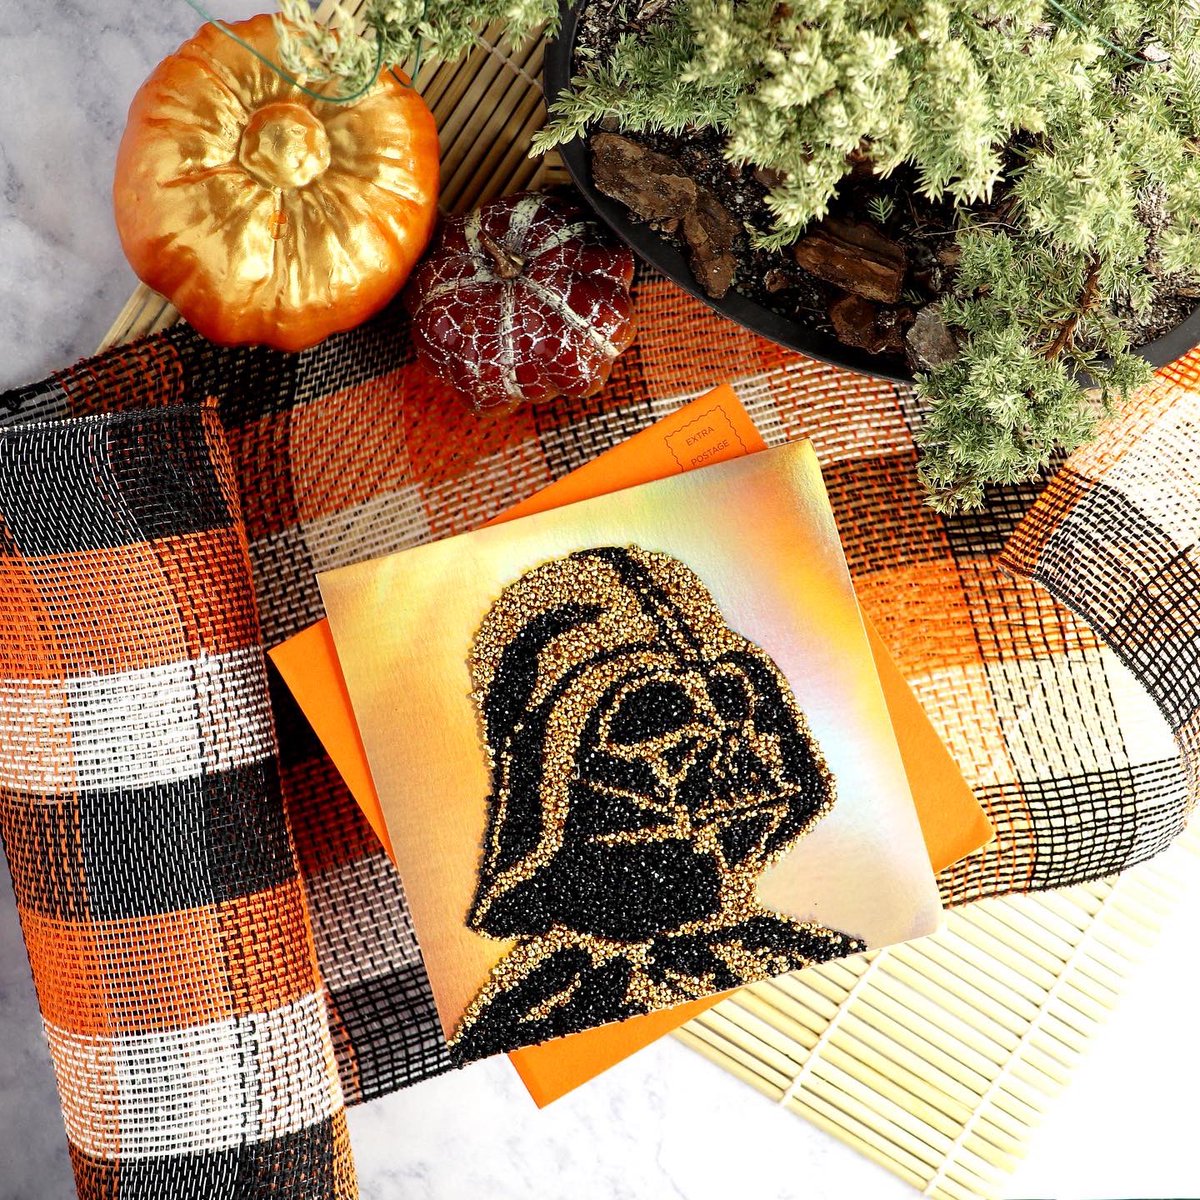 Introducing - the scary side of the Force!

Shop Star Wars Cards: bpc.social/starwarscards

#handmadecards #starwars #halloweencards #bonsaipaperco #halloween #papyruscards